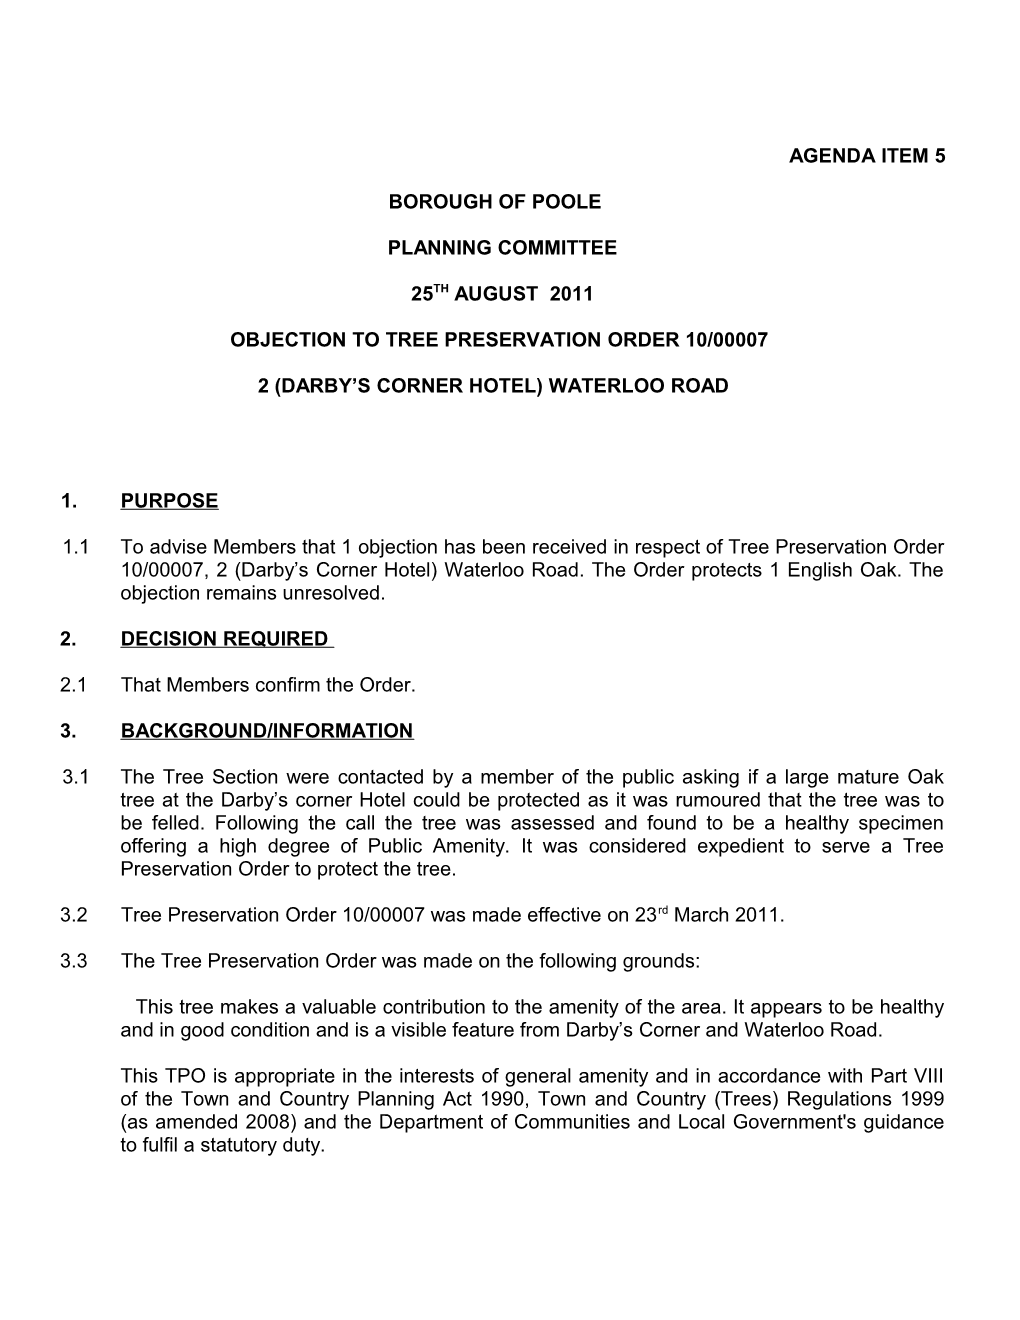 Objection to Tree Preservation Order 10/00007 2 (Darby S Corner Hotel) Waterloo Road